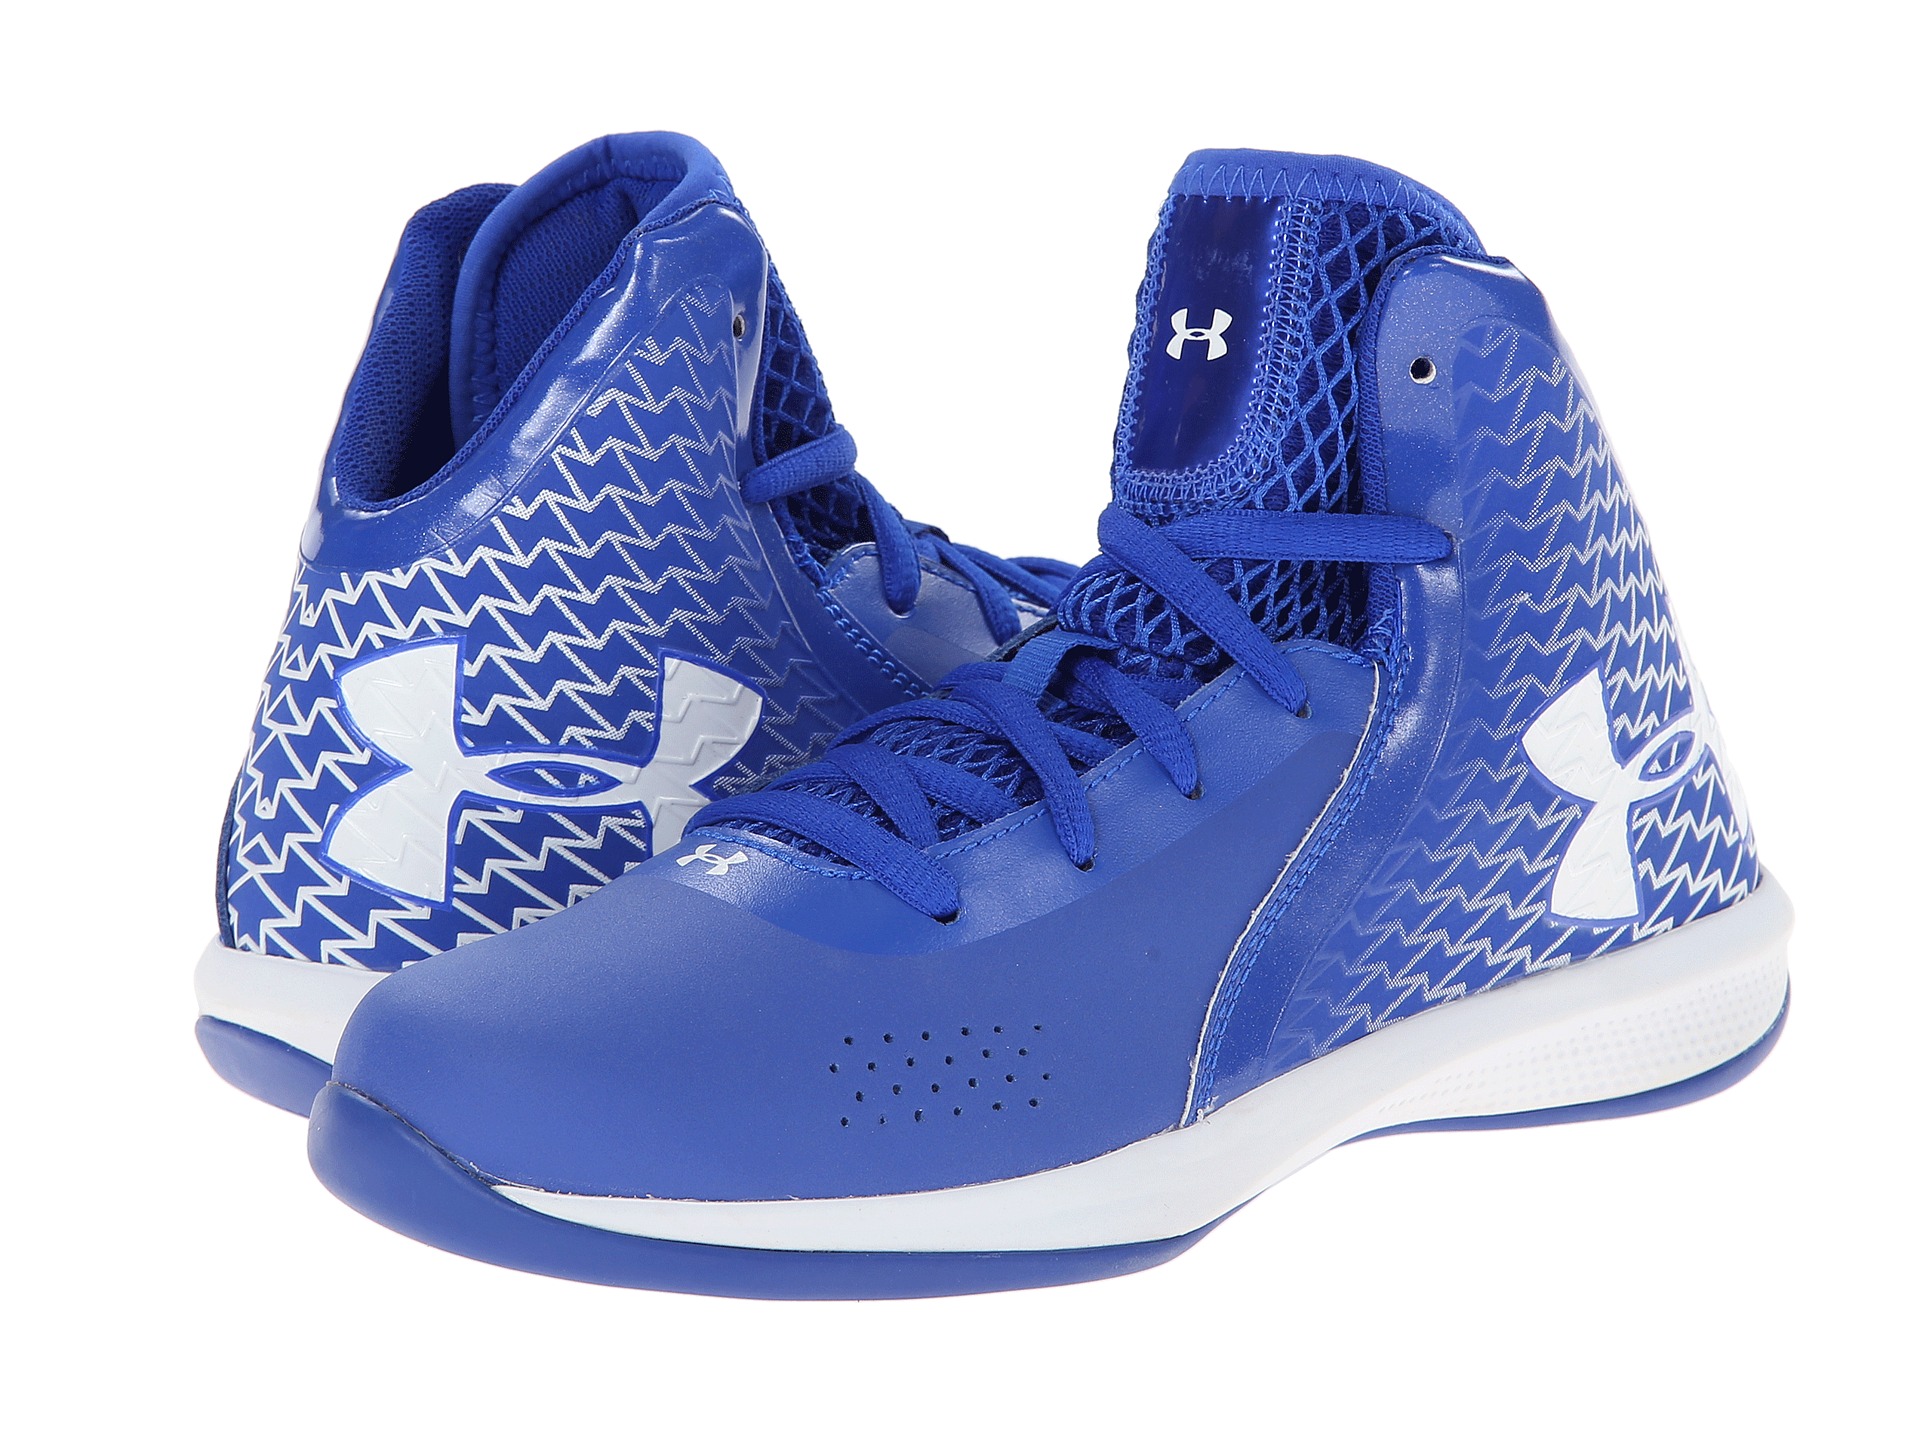 Under Armour Kids Ua Bps Torch Little Kid | Shipped Free at Zappos